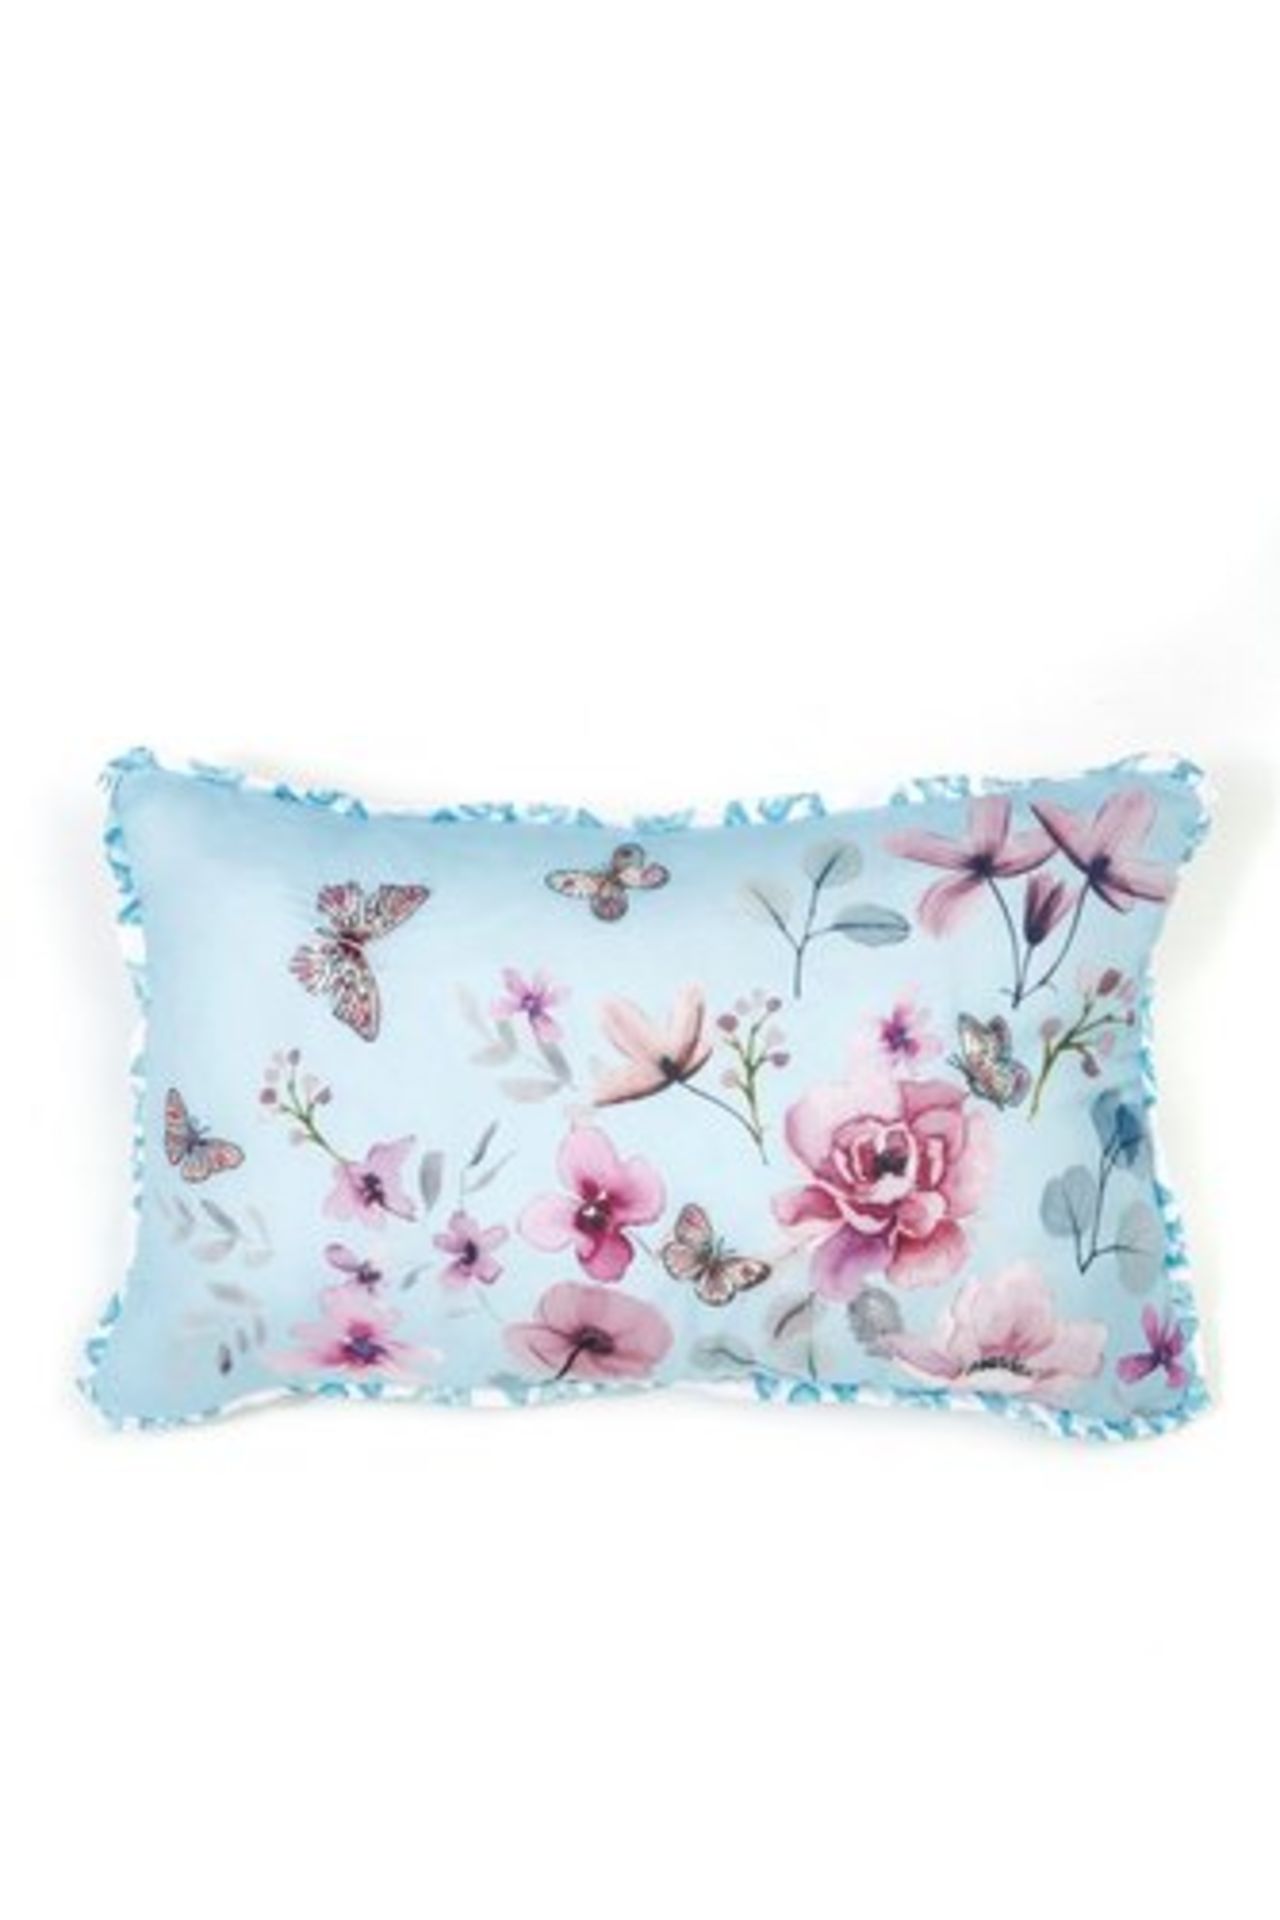 1 AS NEW BAGGED FRENCH FLORAL FILLED BOUDOIR CUSHION (VIEWING AVAILABLE)